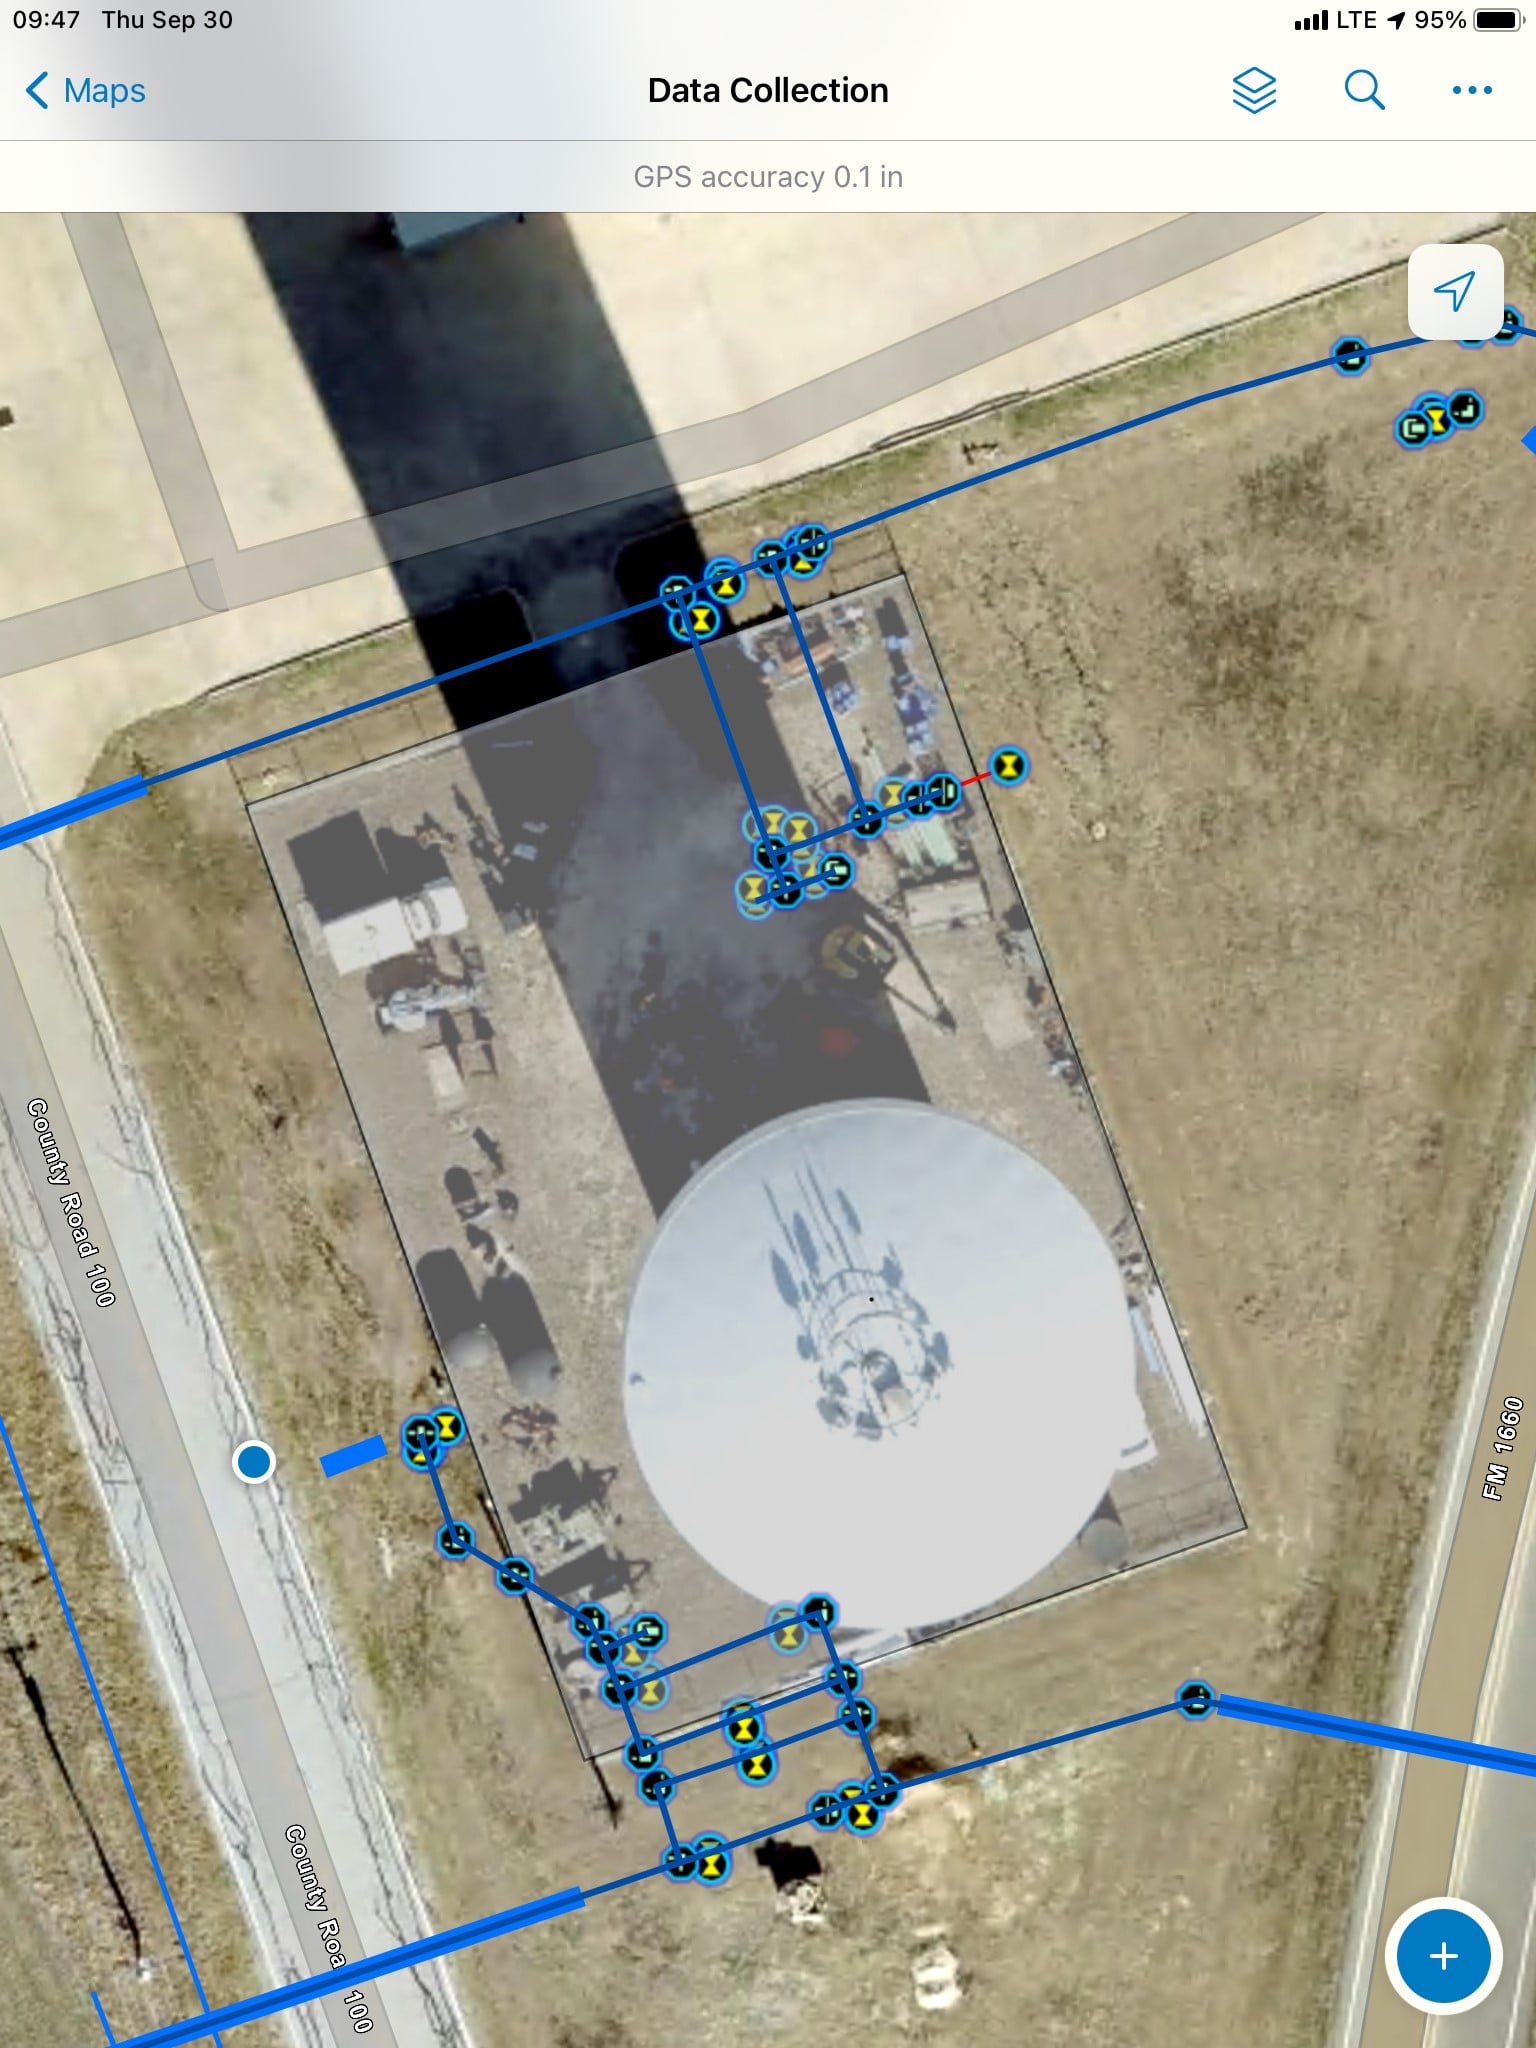 A screenshot of Esri ArcGIS Field Maps shows locations of a mapped water main with high accuracy locations from an Eos Arrow Gold GNSS receiver